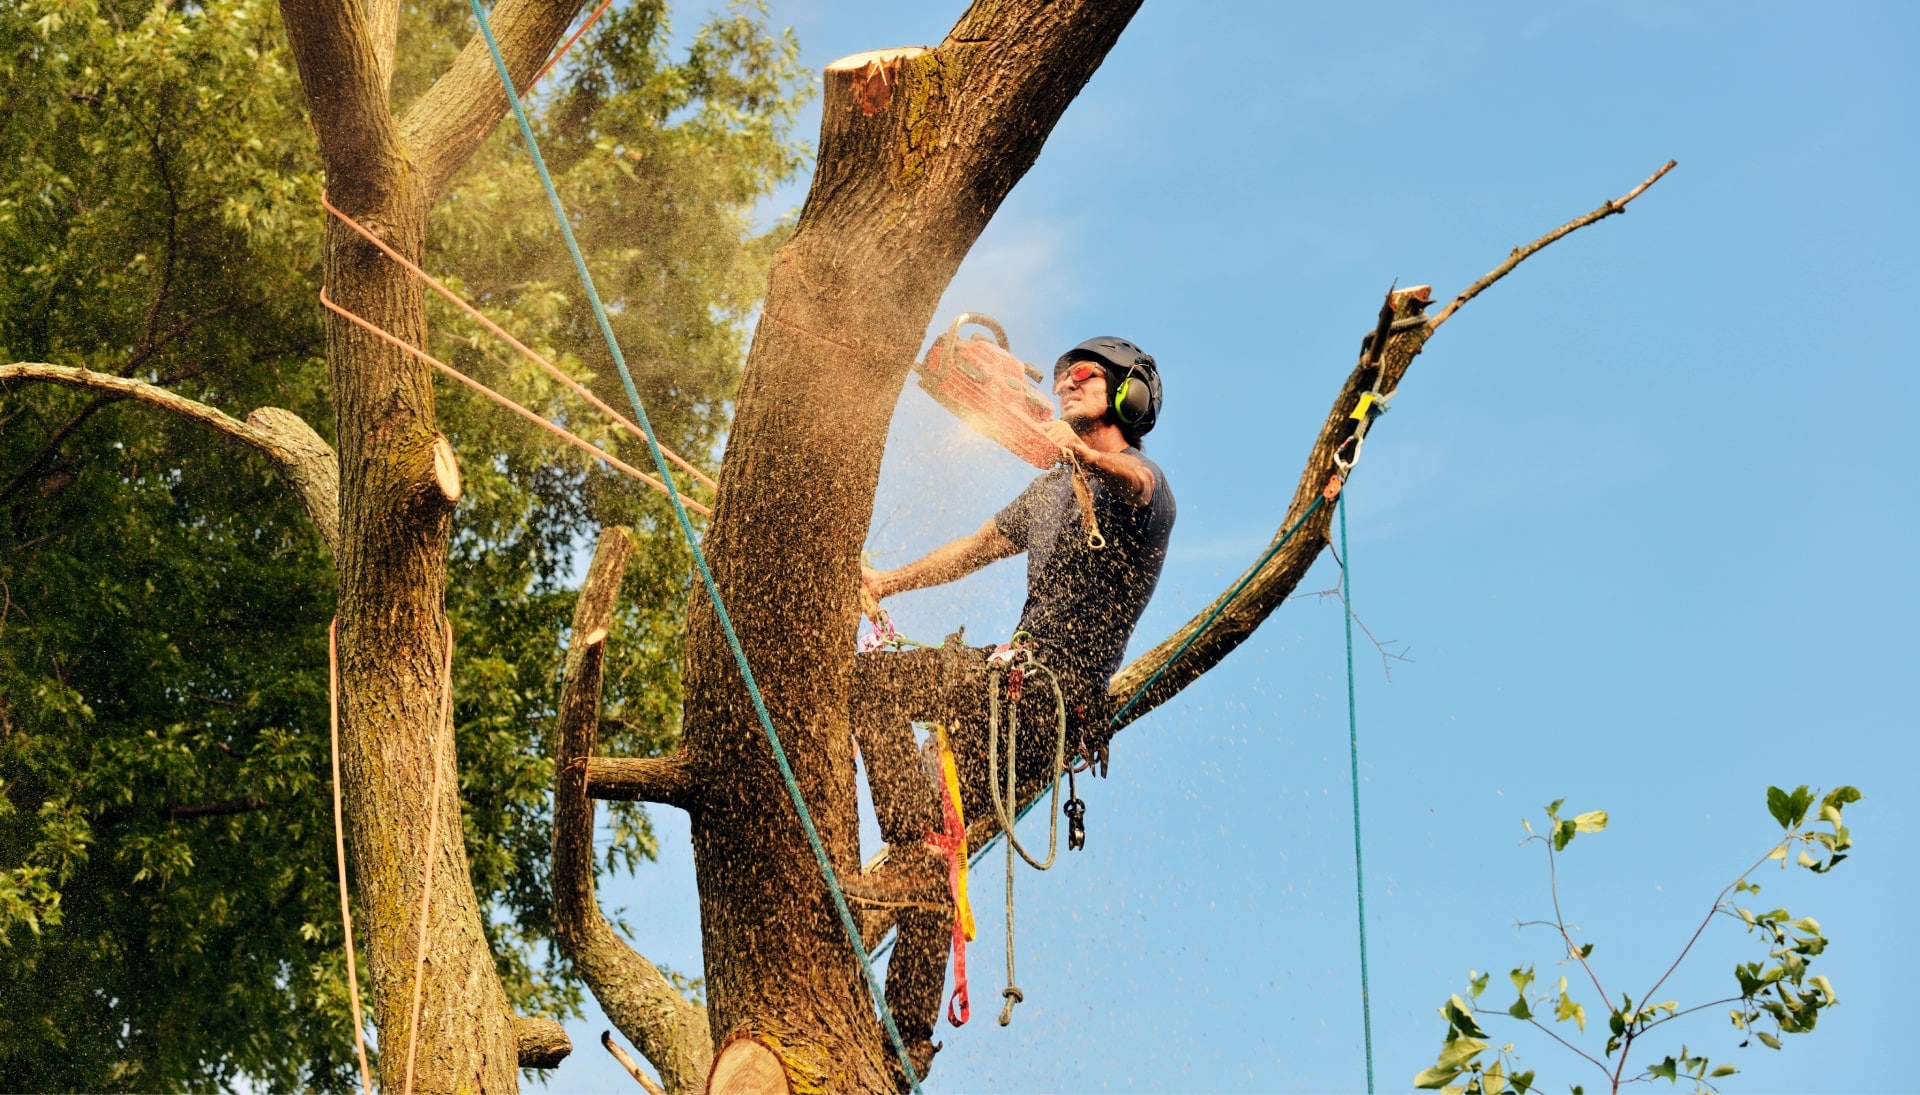 Milledgeville tree removal experts solve tree issues.